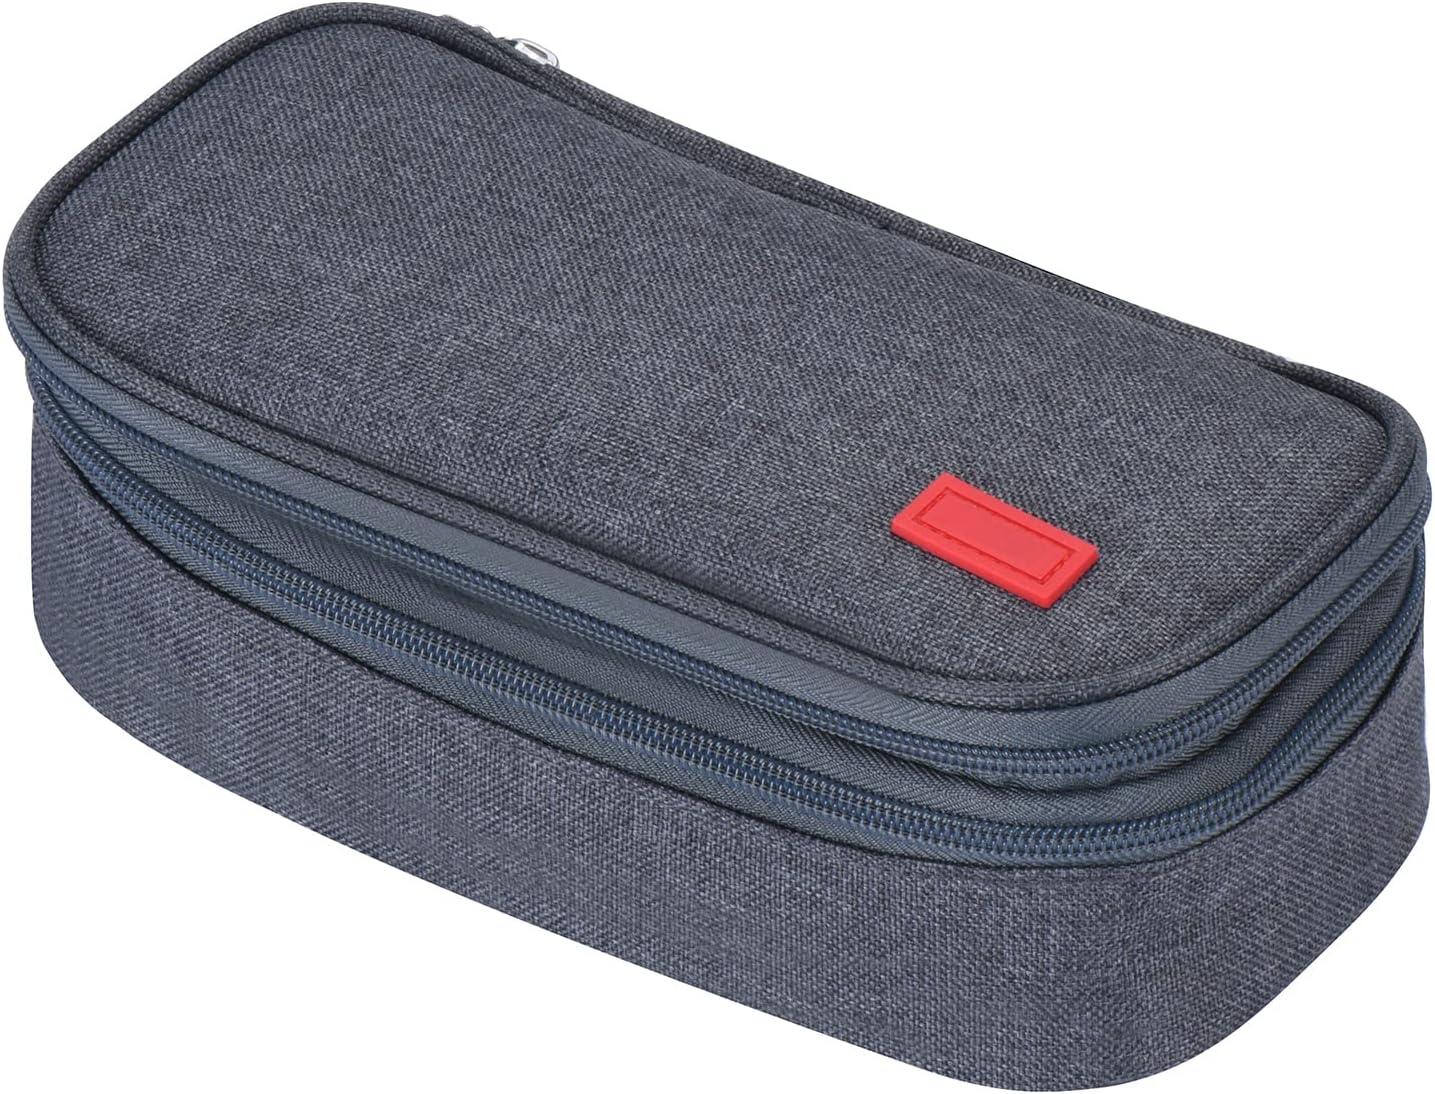 Large Capacity Pencil Case 3 Compartments Canvas foe Boys & Girls Students